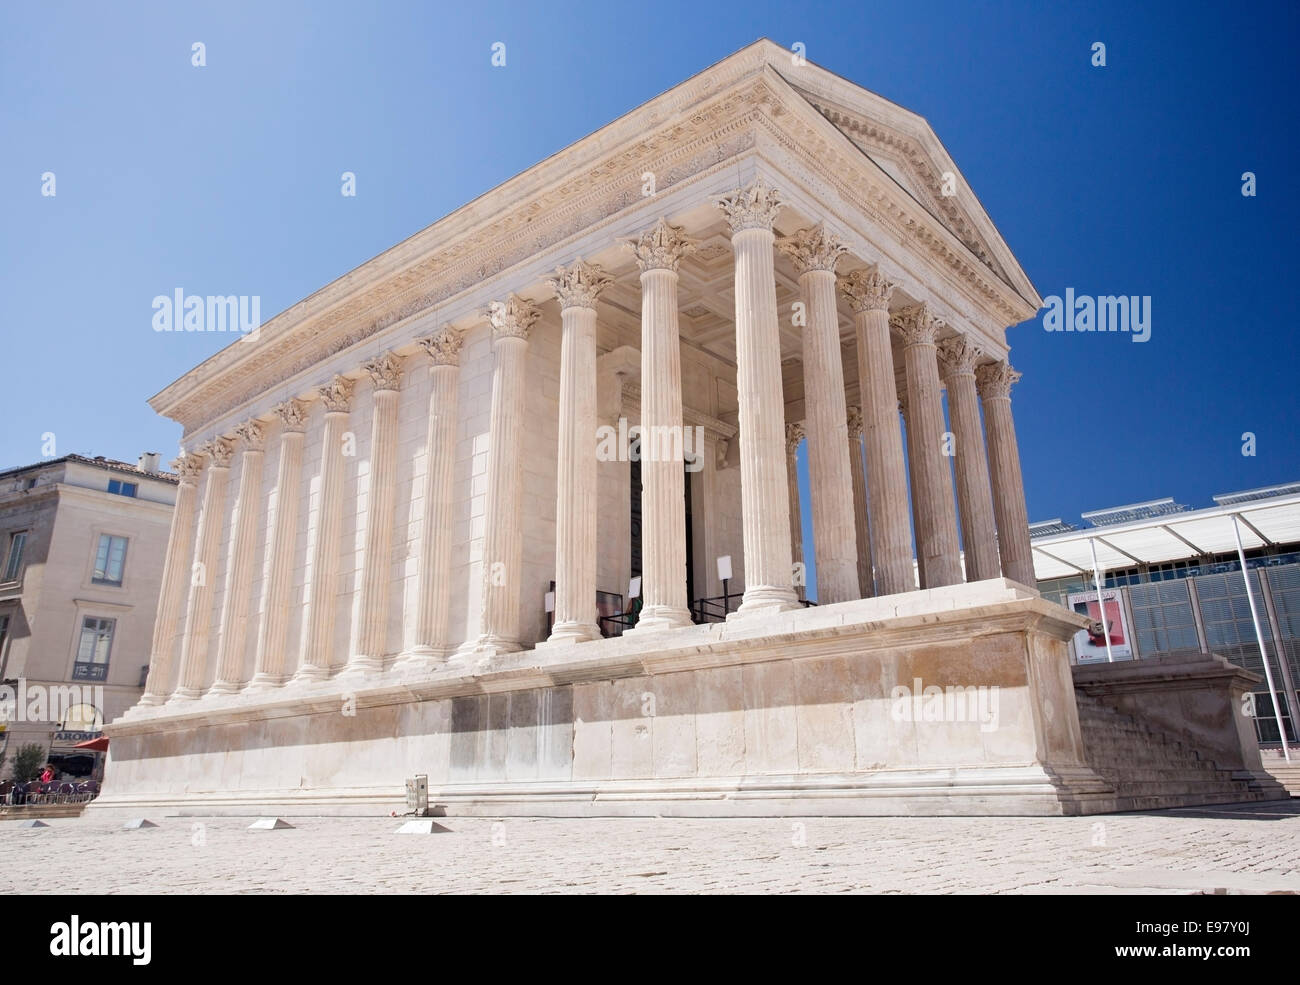 Maison Carree, ancient Roman temple, Nimes, city in France Stock Photo